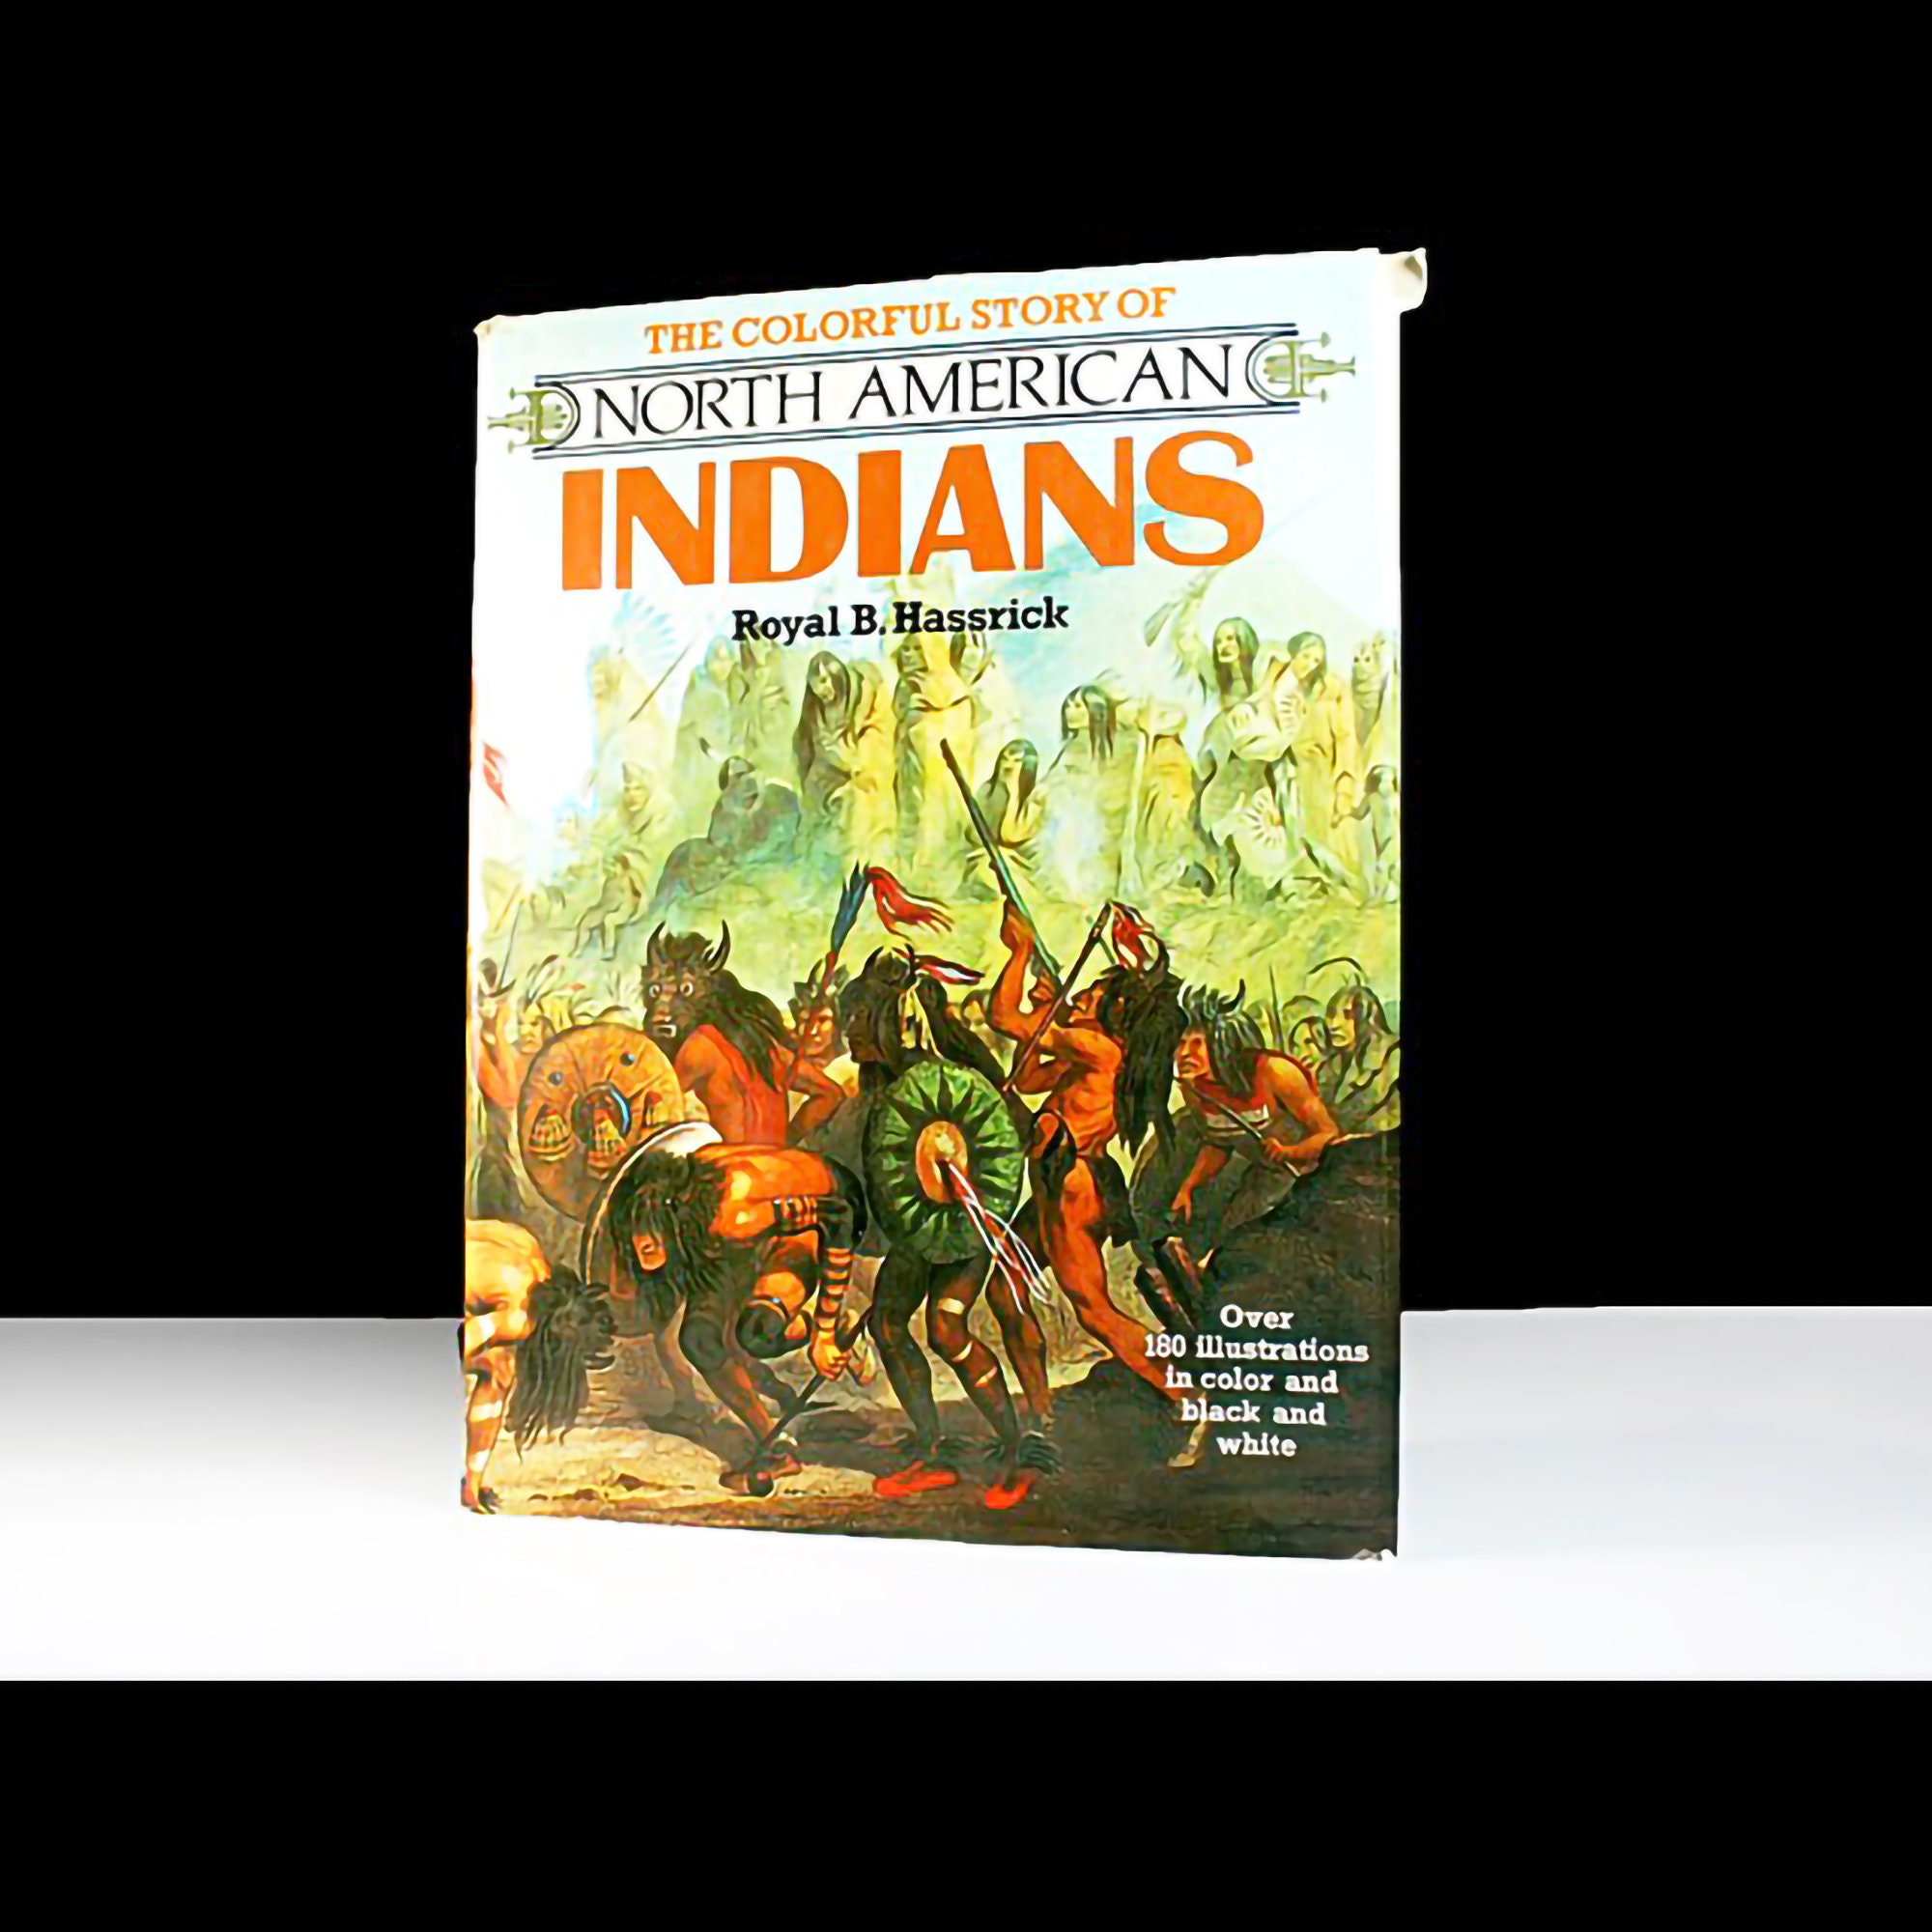 Hardcover Book, North American Indians, Royal B. Hassrick, First